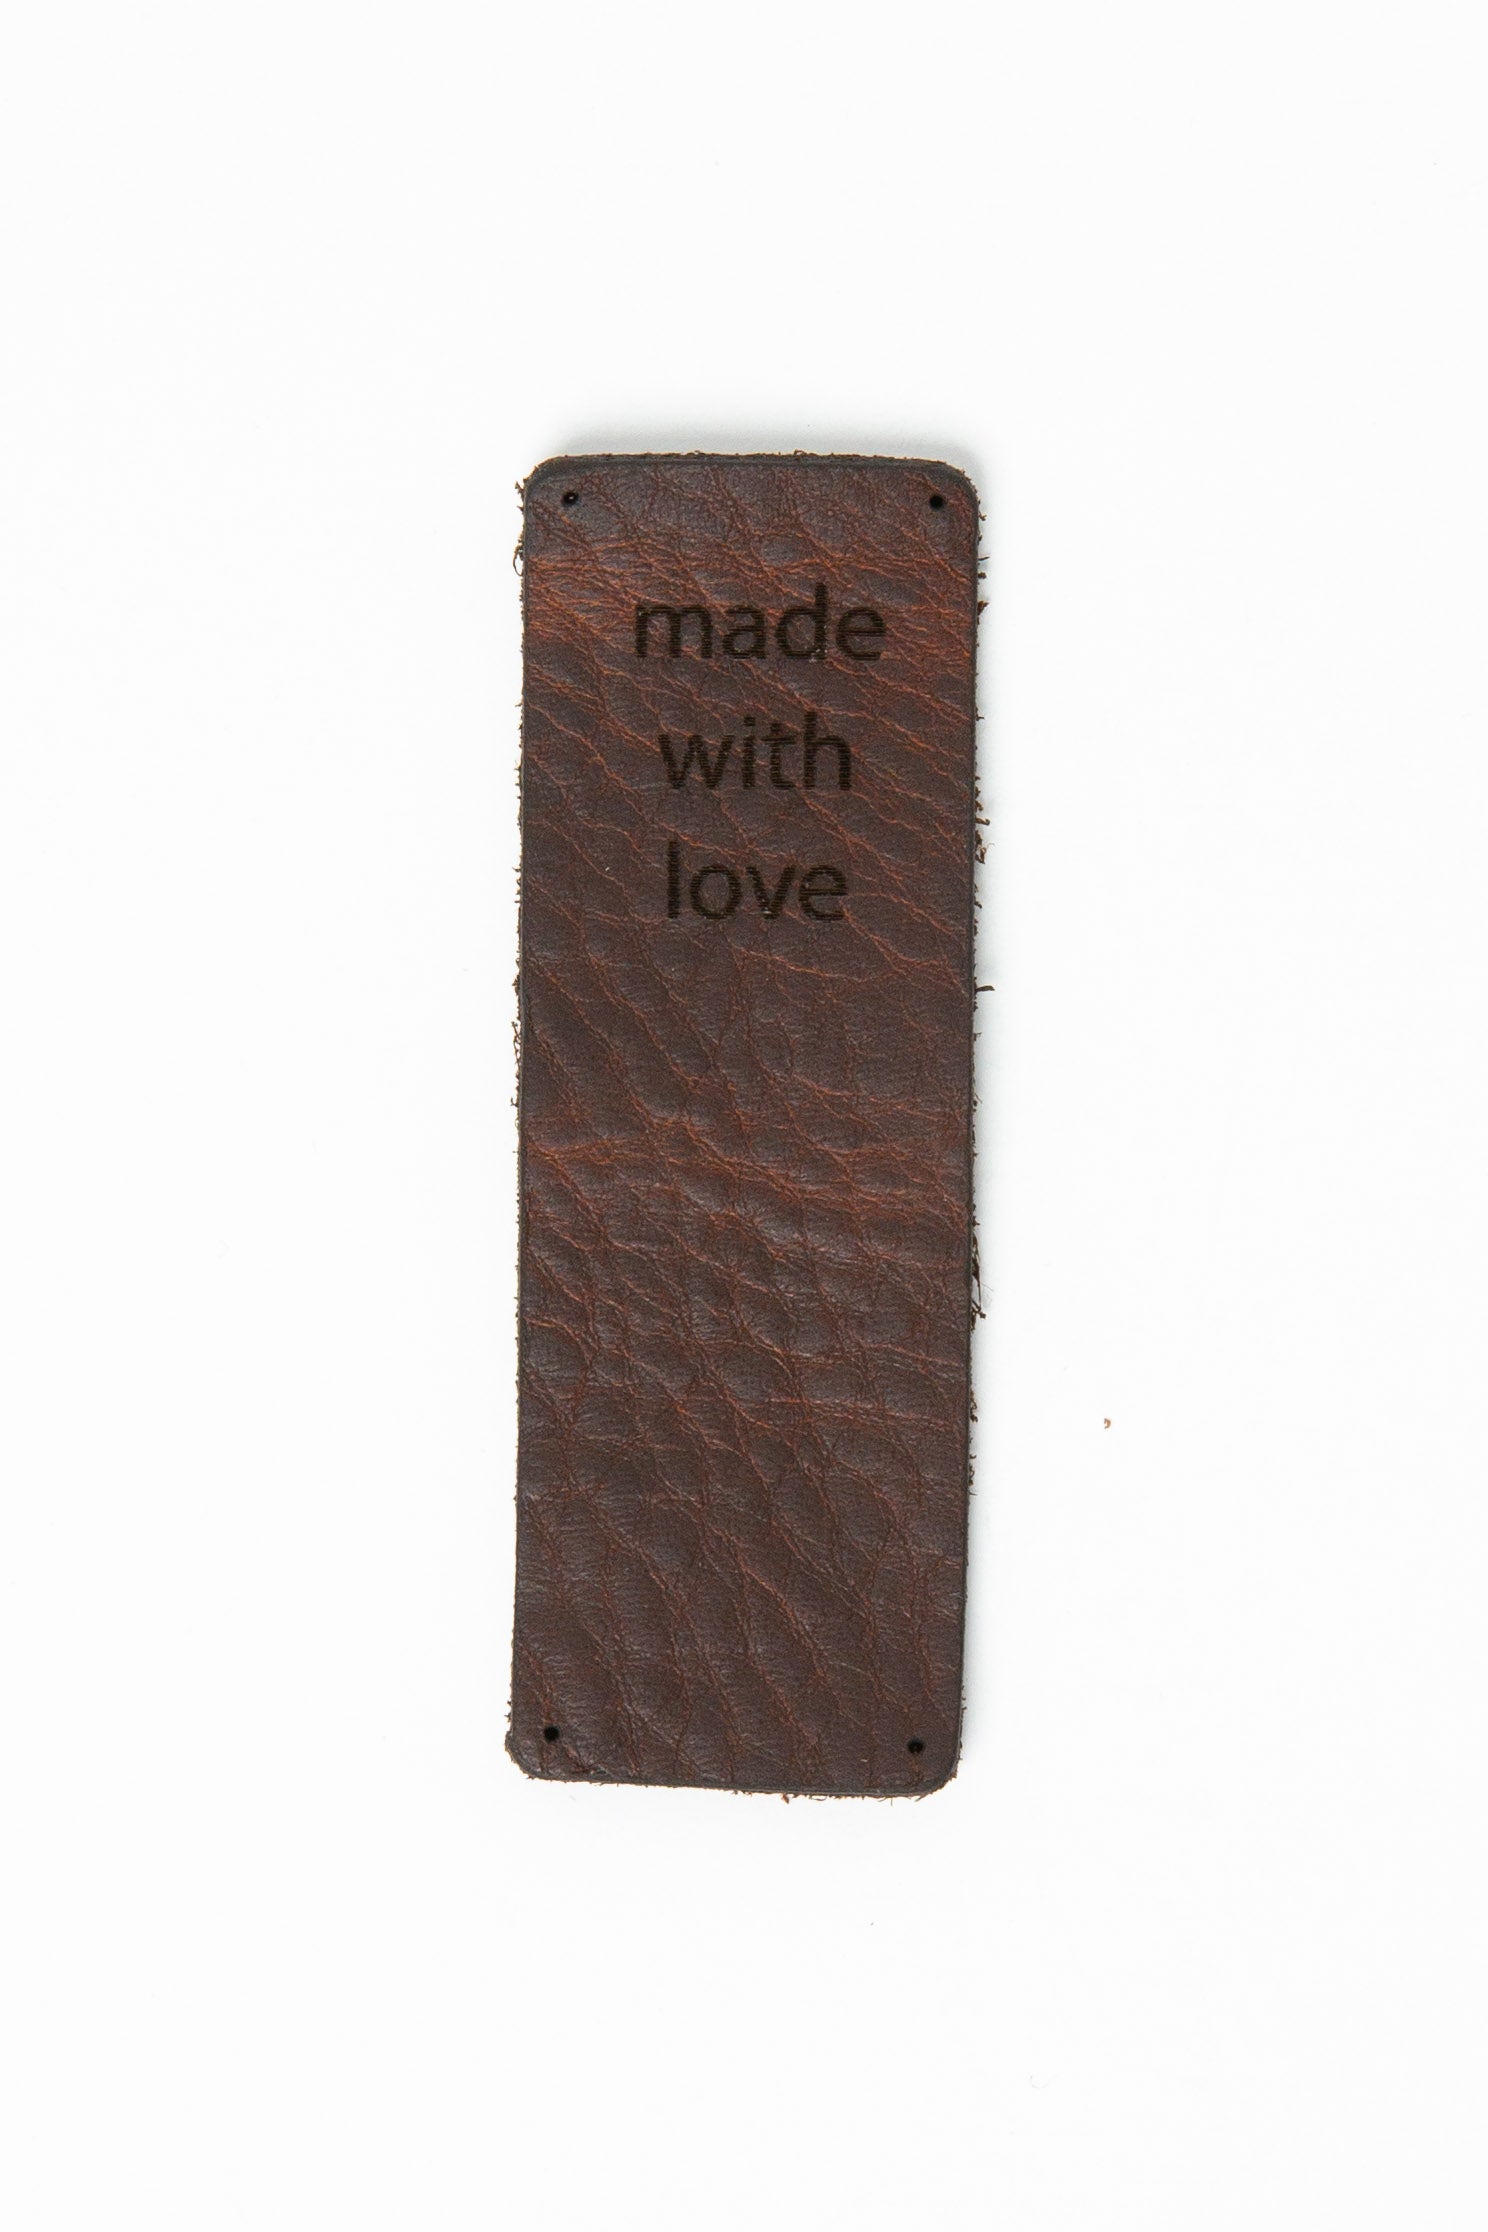 Purl and Hank Leather Label leather made with love